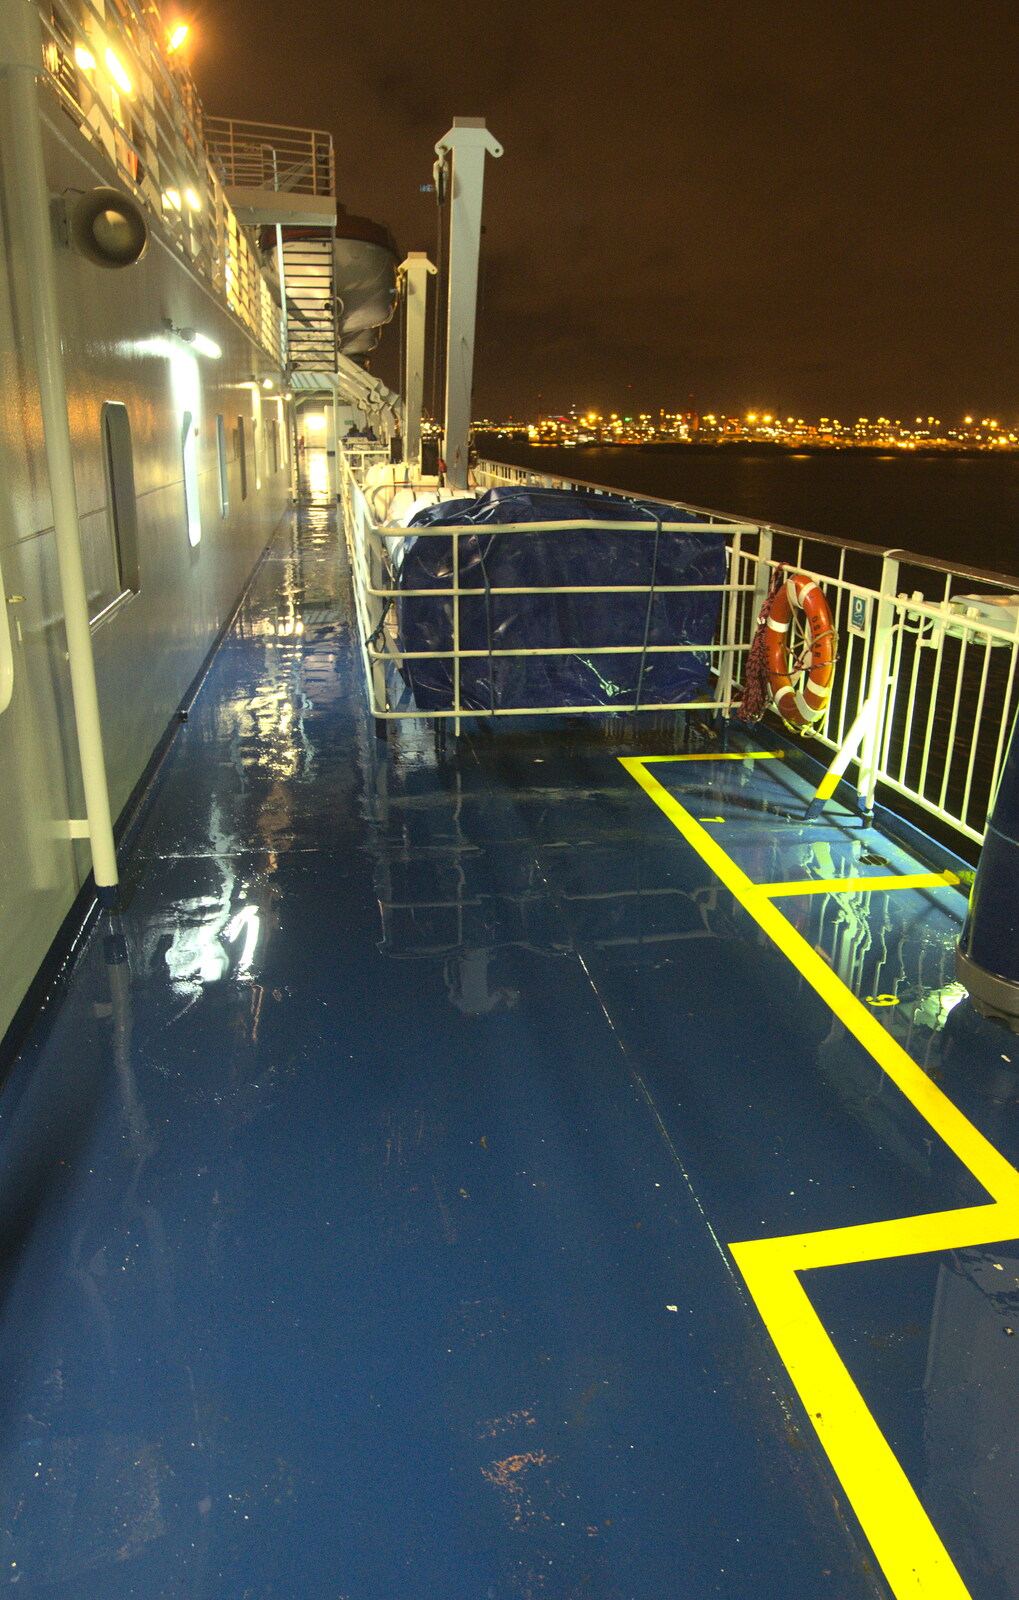 The empty decks from Conwy, Holyhead and the Ferry to Ireland - 21st December 2015